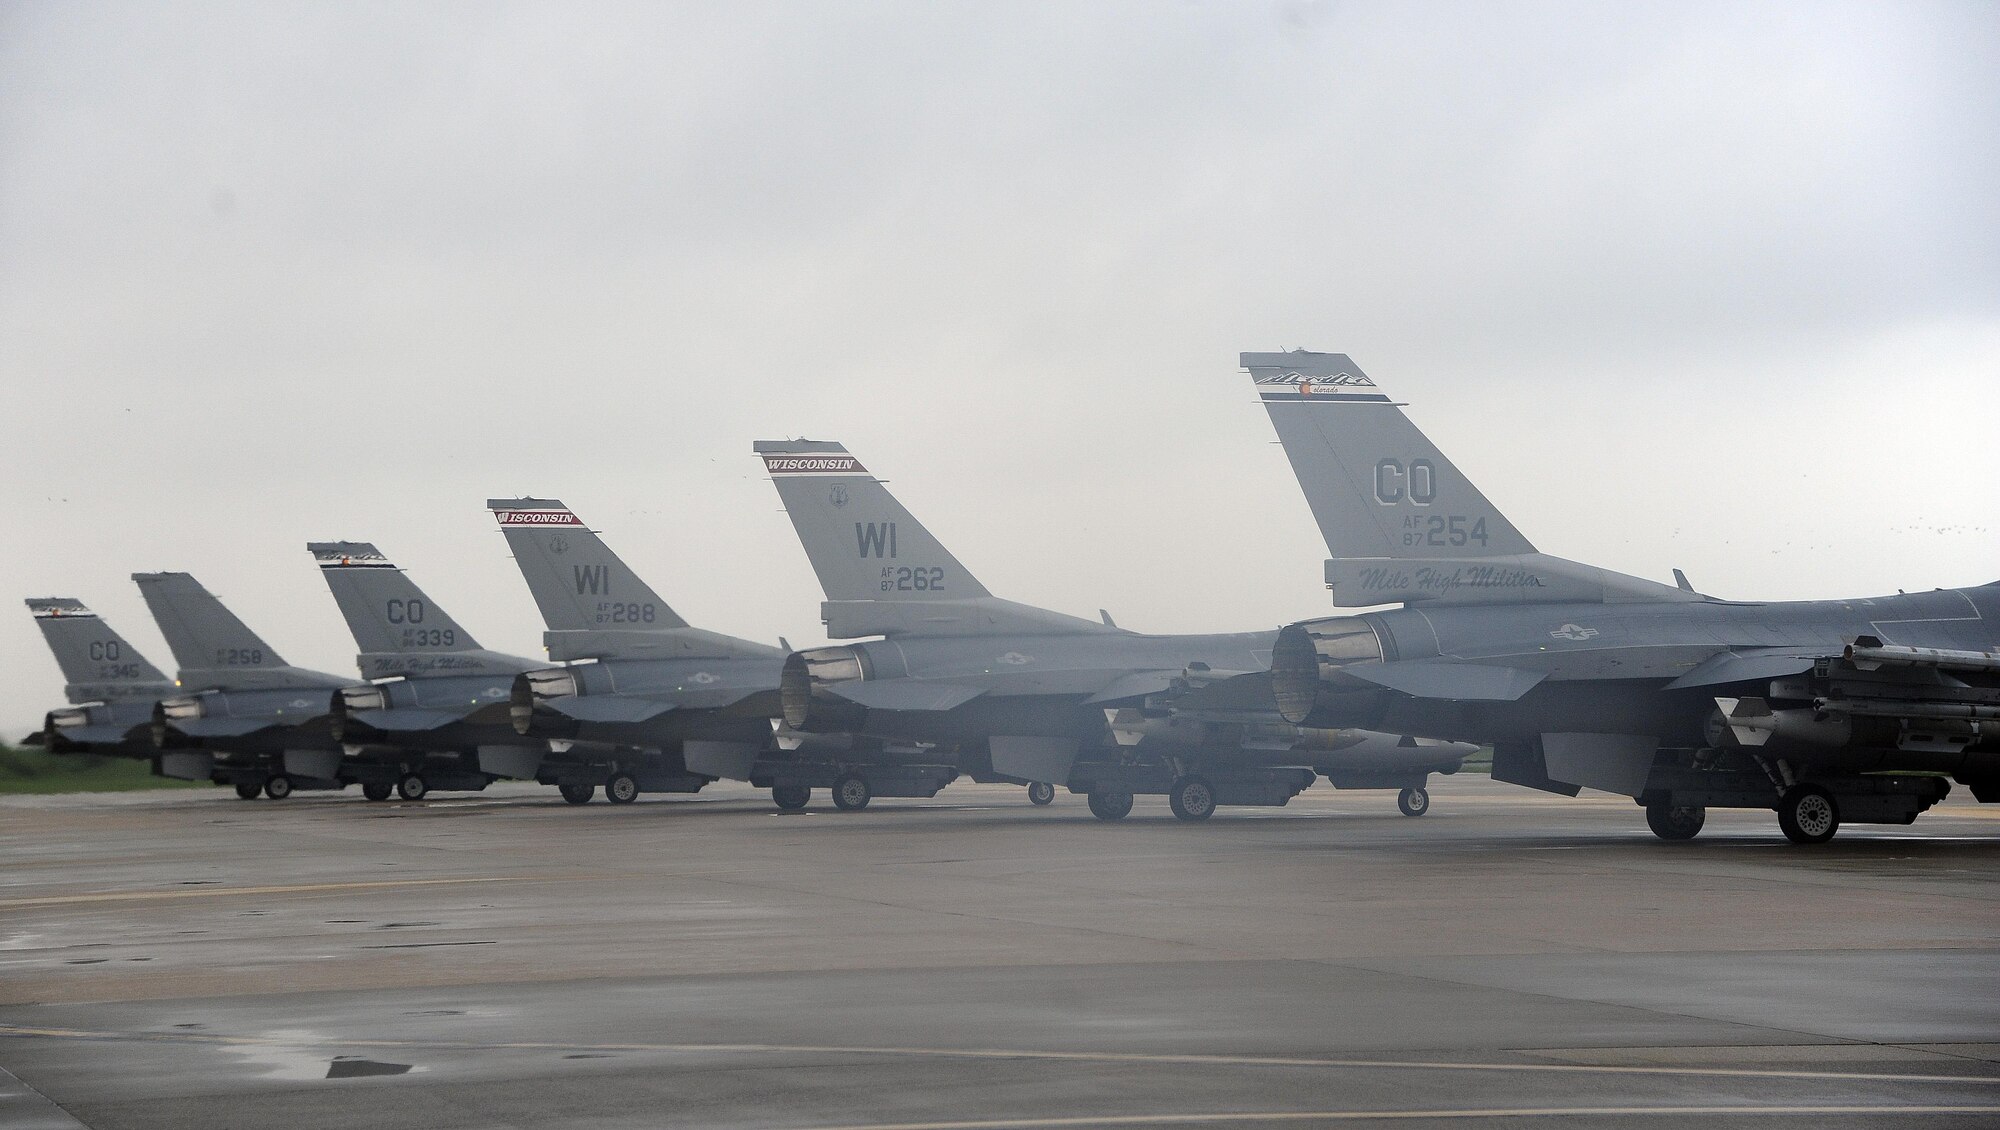 U.S. Air Force Fighting Falcon F-16s, or more commonly Vipers, from the 8th Fighter Wing line up for an elephant walk on Aug. 22, 2017 at Kunsan Air Base, Republic of Korea. The Viper is a multi-role fighter aircraft capable of close-air support for ground forces and dominating enemy air assets in air-to-air combat. The elephant walk was a part of the regularly scheduled Operational Readiness Exercise Beverly Pack 17-3, which tested the base’s ability to respond to various scenarios in a contingency environment. (U.S. Air Force photo by Senior Airman Colby L. Hardin)